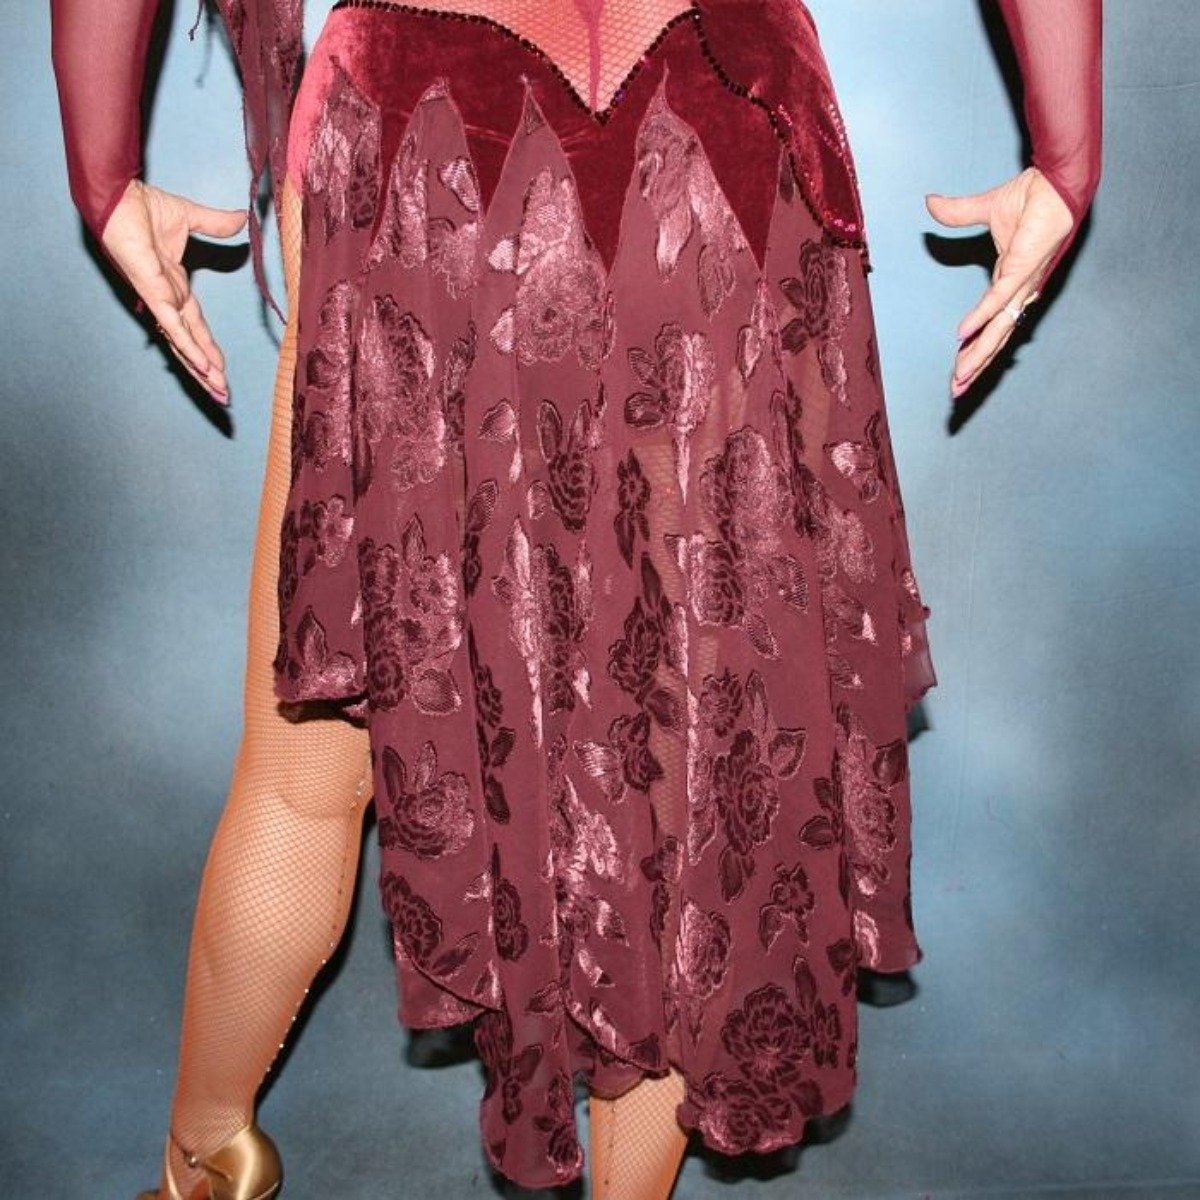 Crystal's Creations close up bottom view of Burgundy stretch velvet Latin/rhythm dress created on burgundy stretch mesh base with rose patterned clip/cut chiffon, is embellished with burgundy, fuchsia, antique rose, & orchid Swarovski rhinestone work & a touch of Swarovski hand beading.